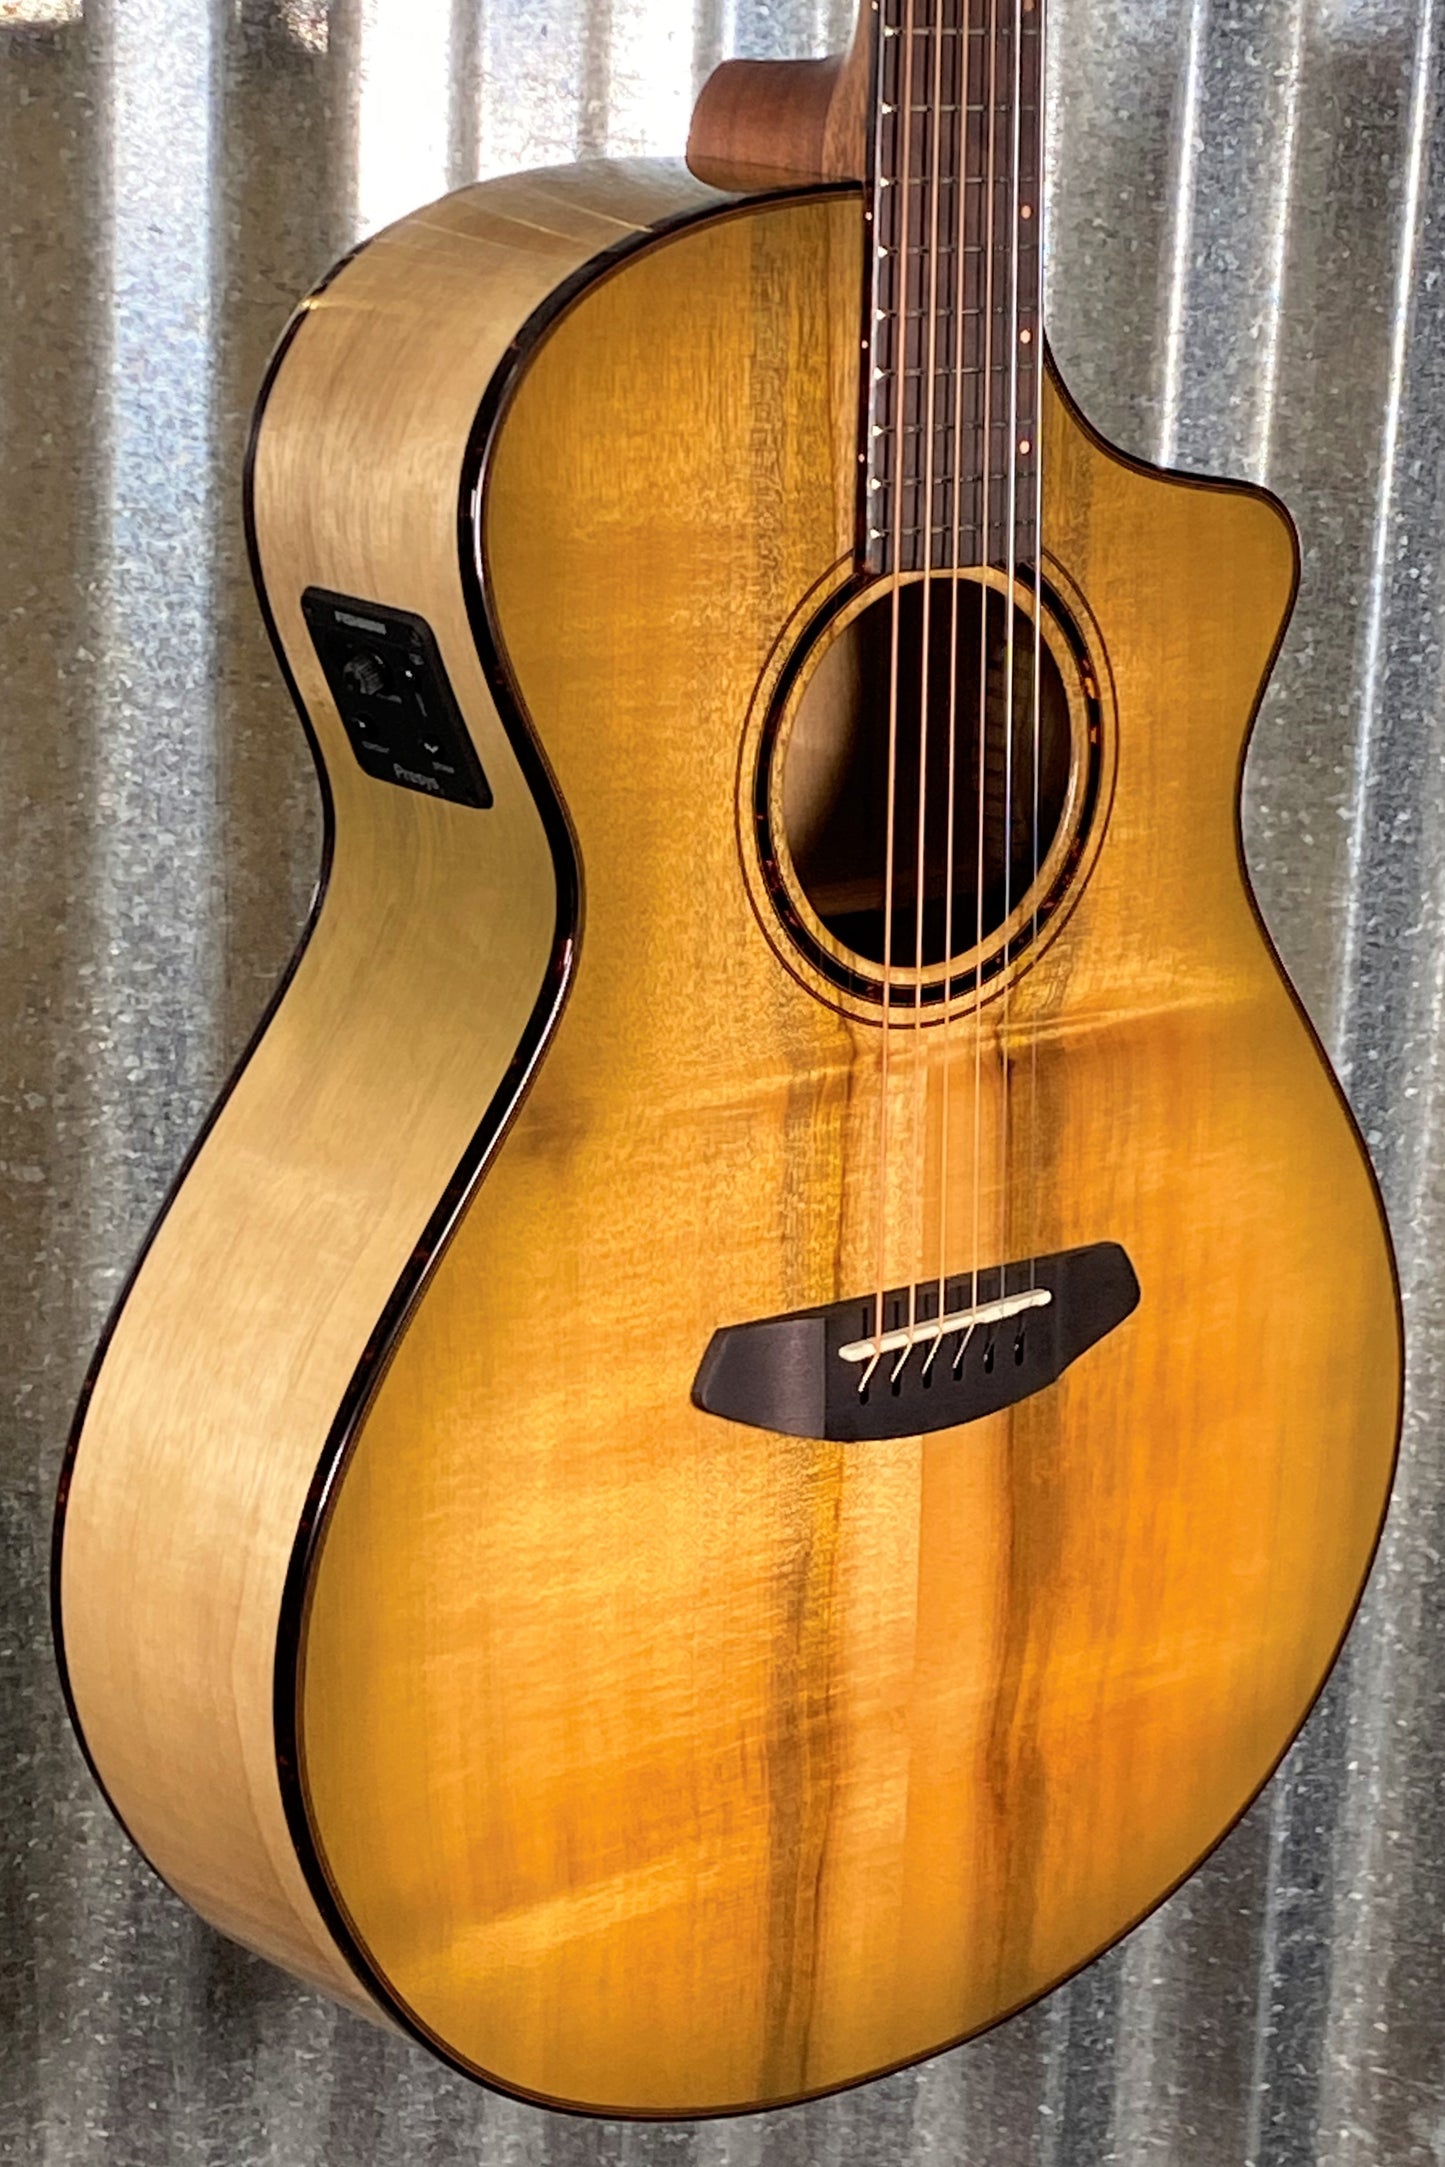 Breedlove Pursuit Exotic S Concert Sweetgrass CE Myrtlewood Acoustic Electric Guitar PSCN41CEMYMY #4518